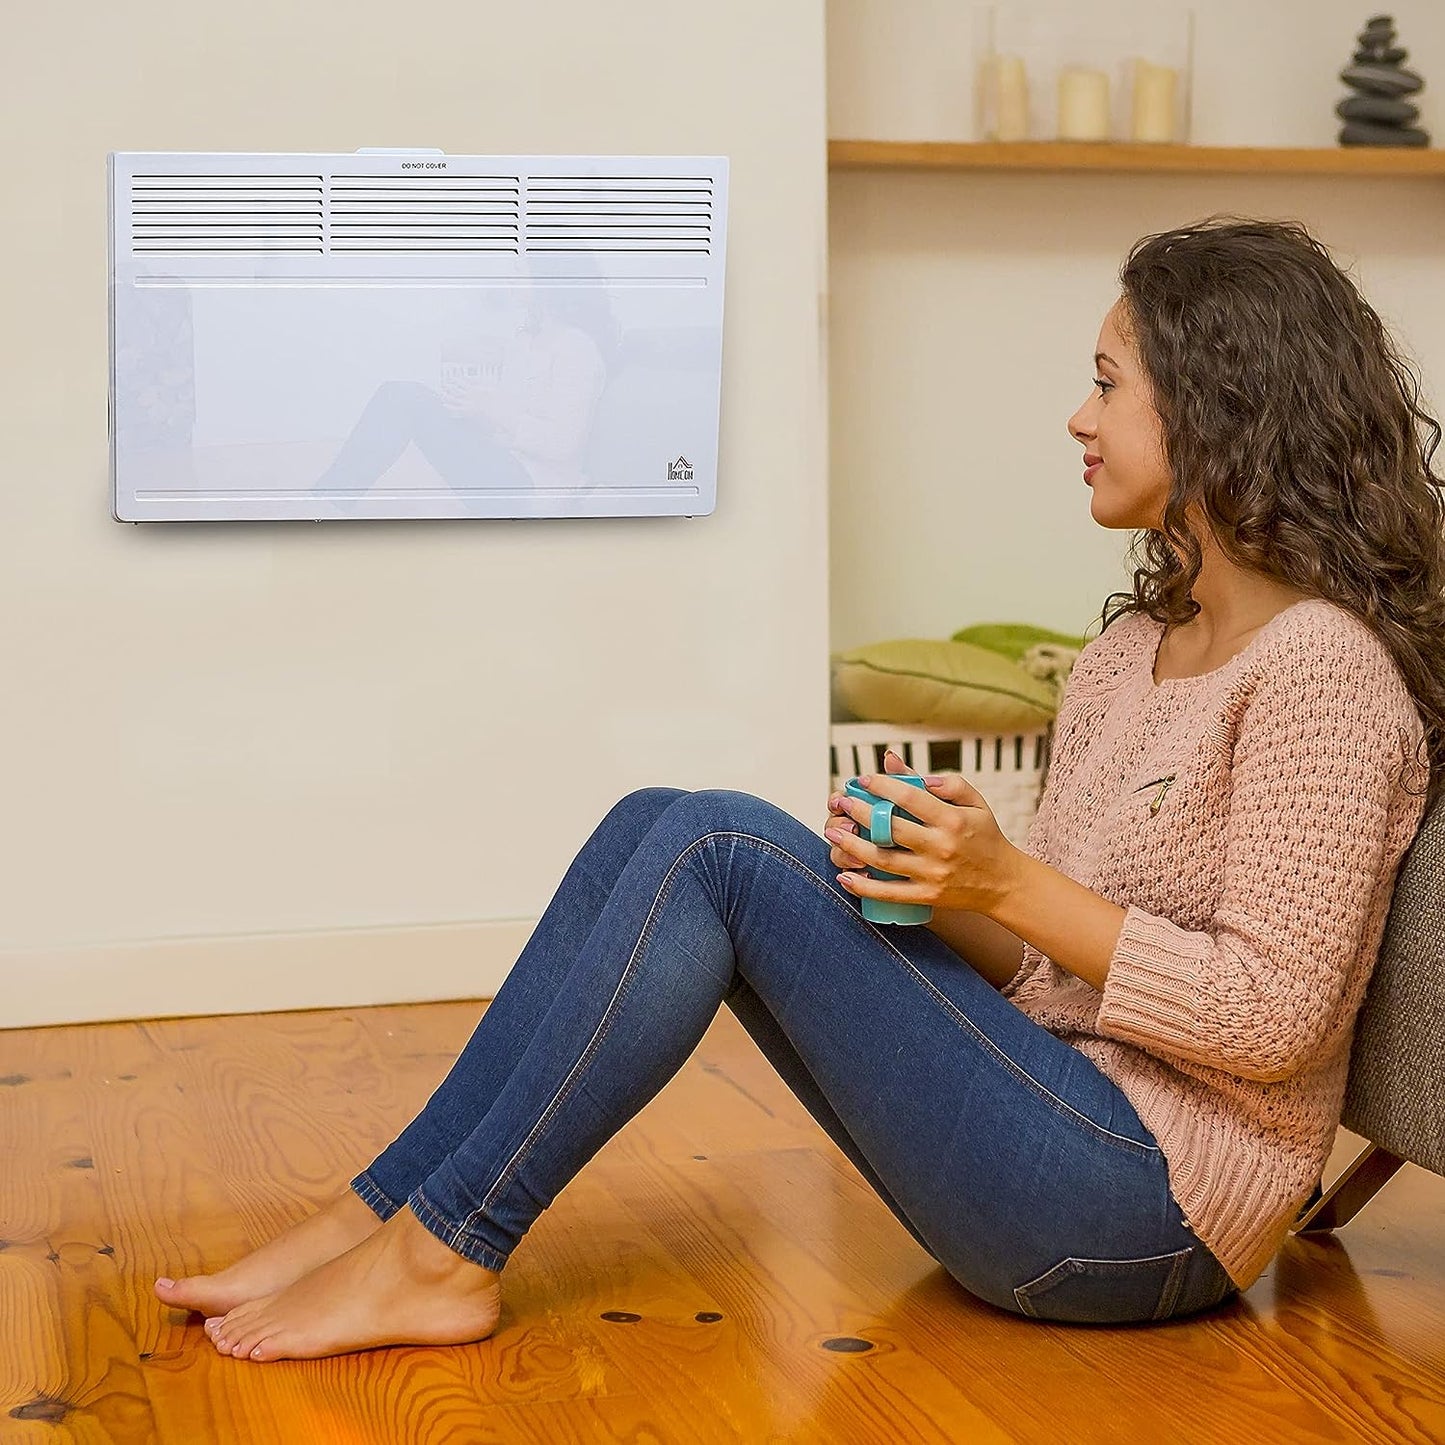 Maplin Plus Freestanding / Wall-Mounted Convector Portable Radiator Heater with Adjustable Thermostat - maplin.co.uk